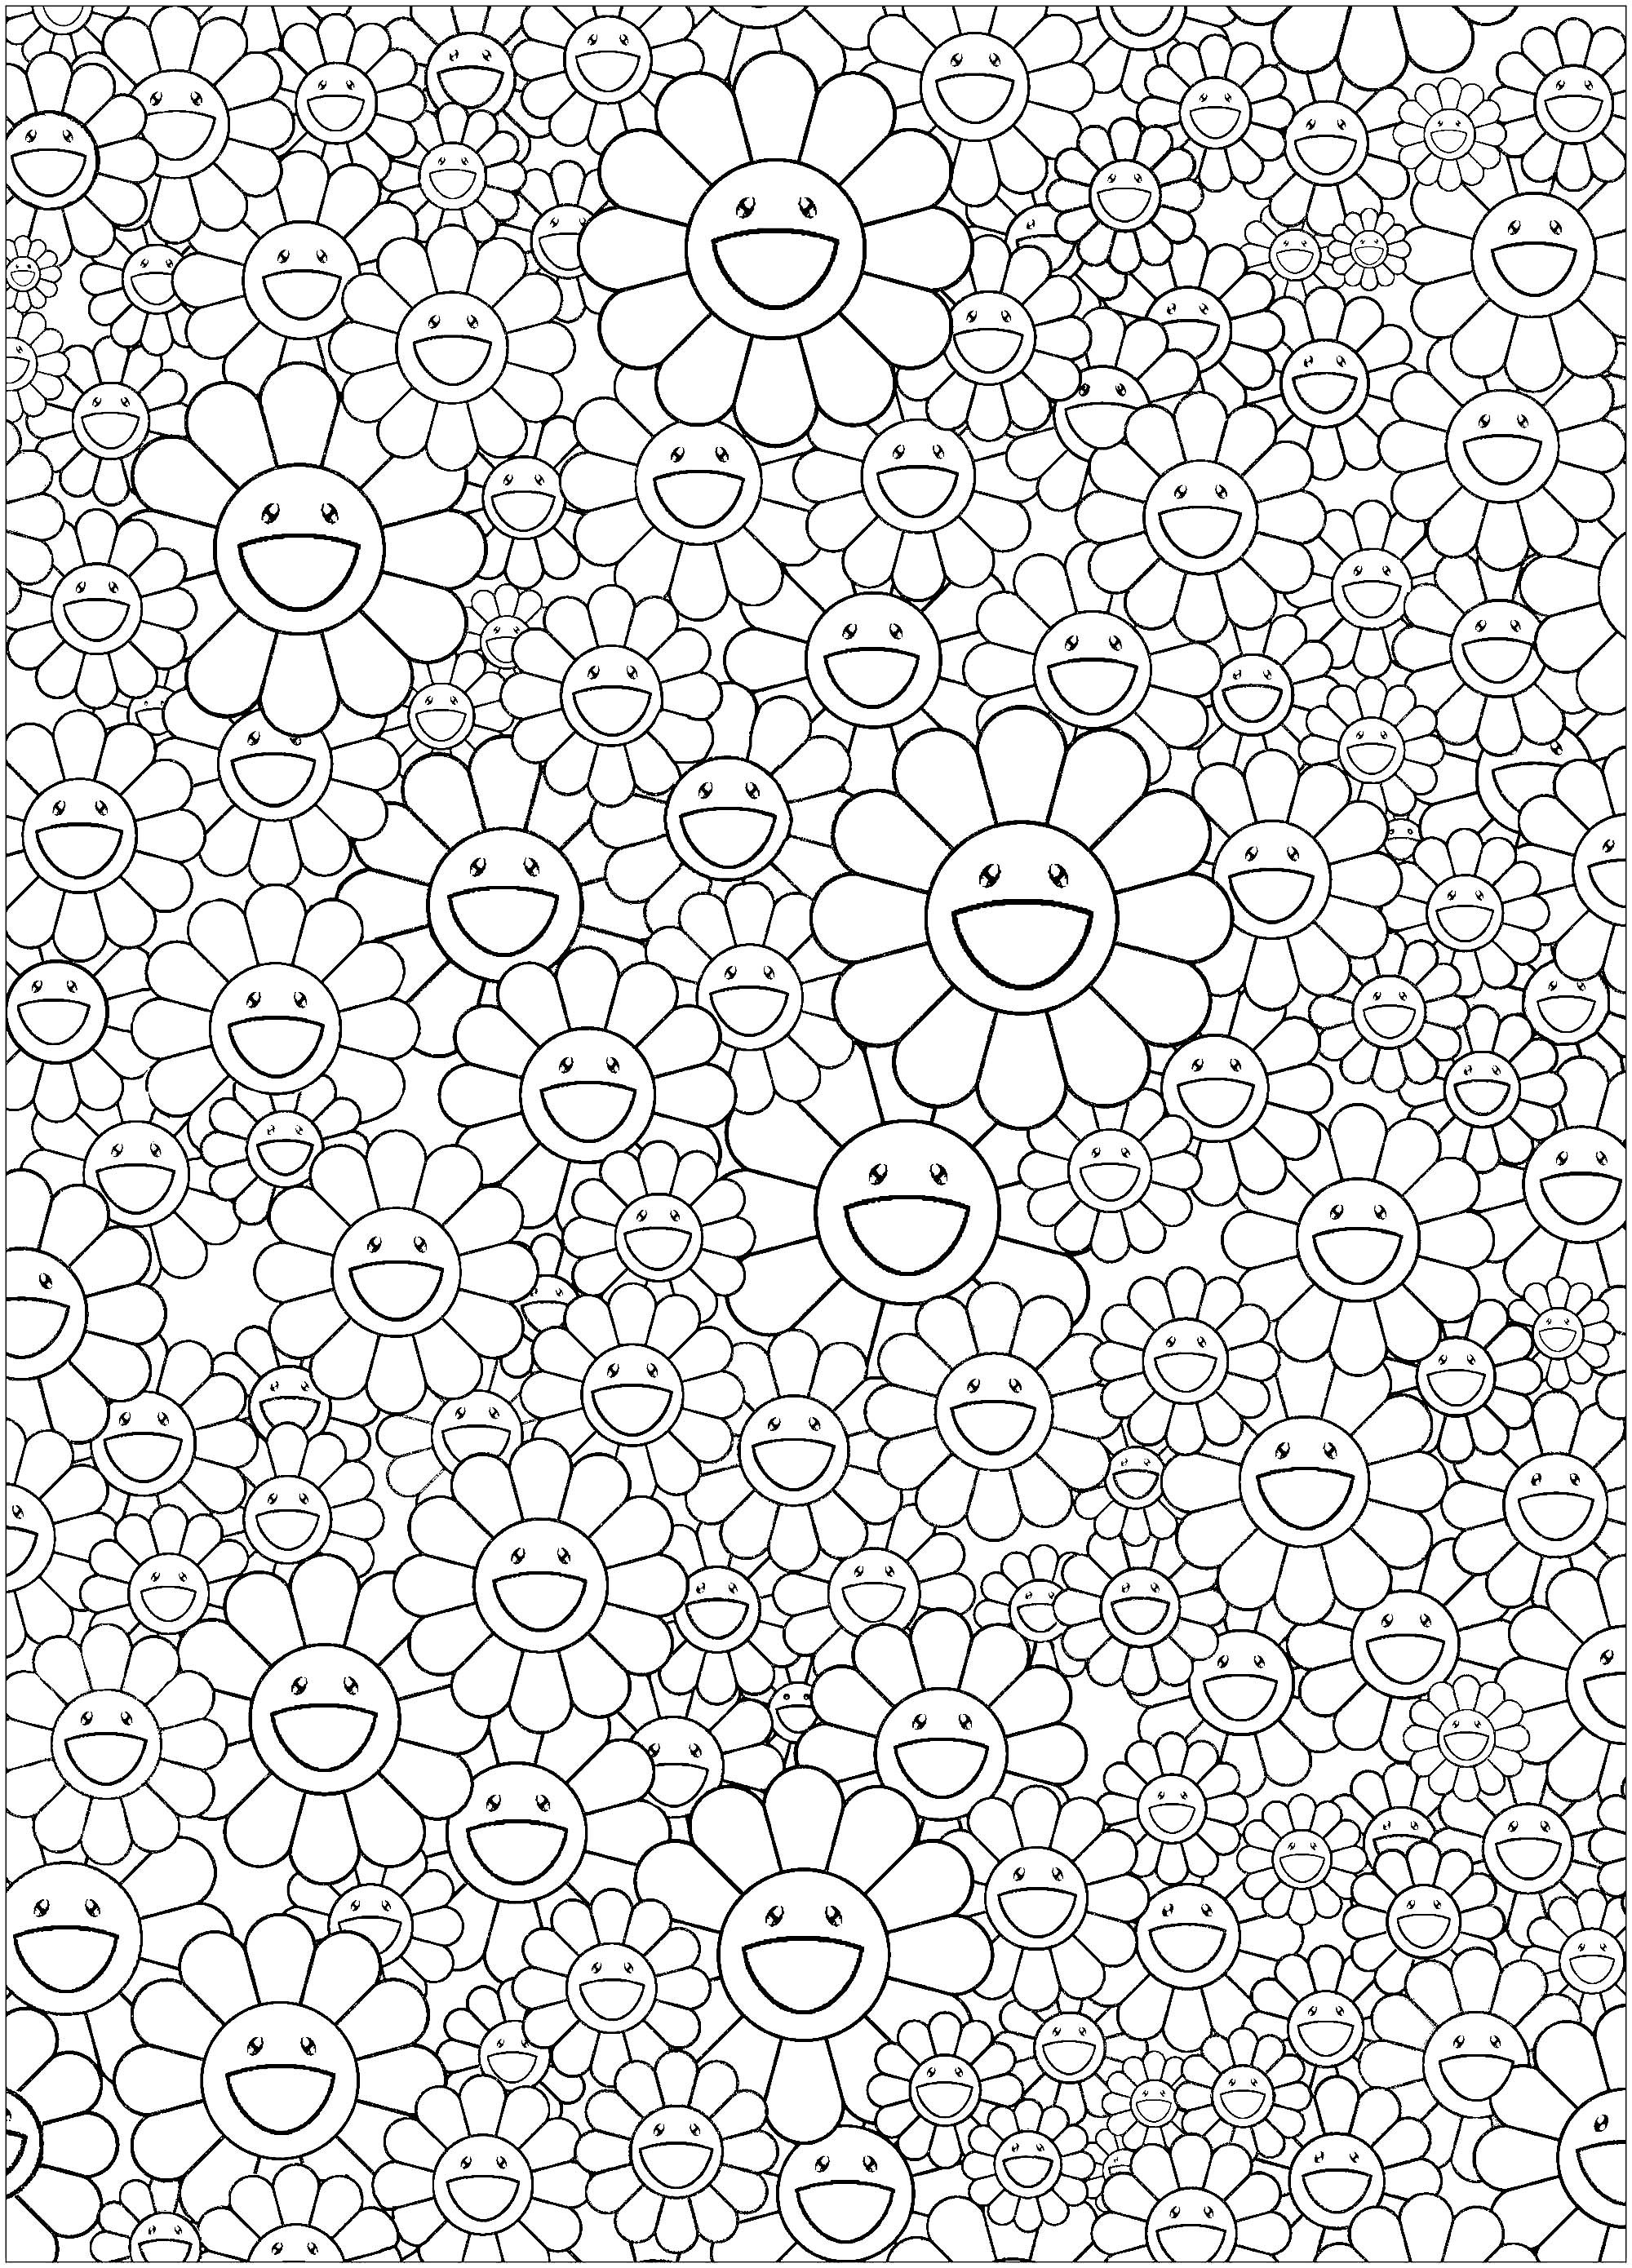 Coloring page inspired by a work by Japanese artist Takashi Murakami (style : Superflat). Happy flowers !